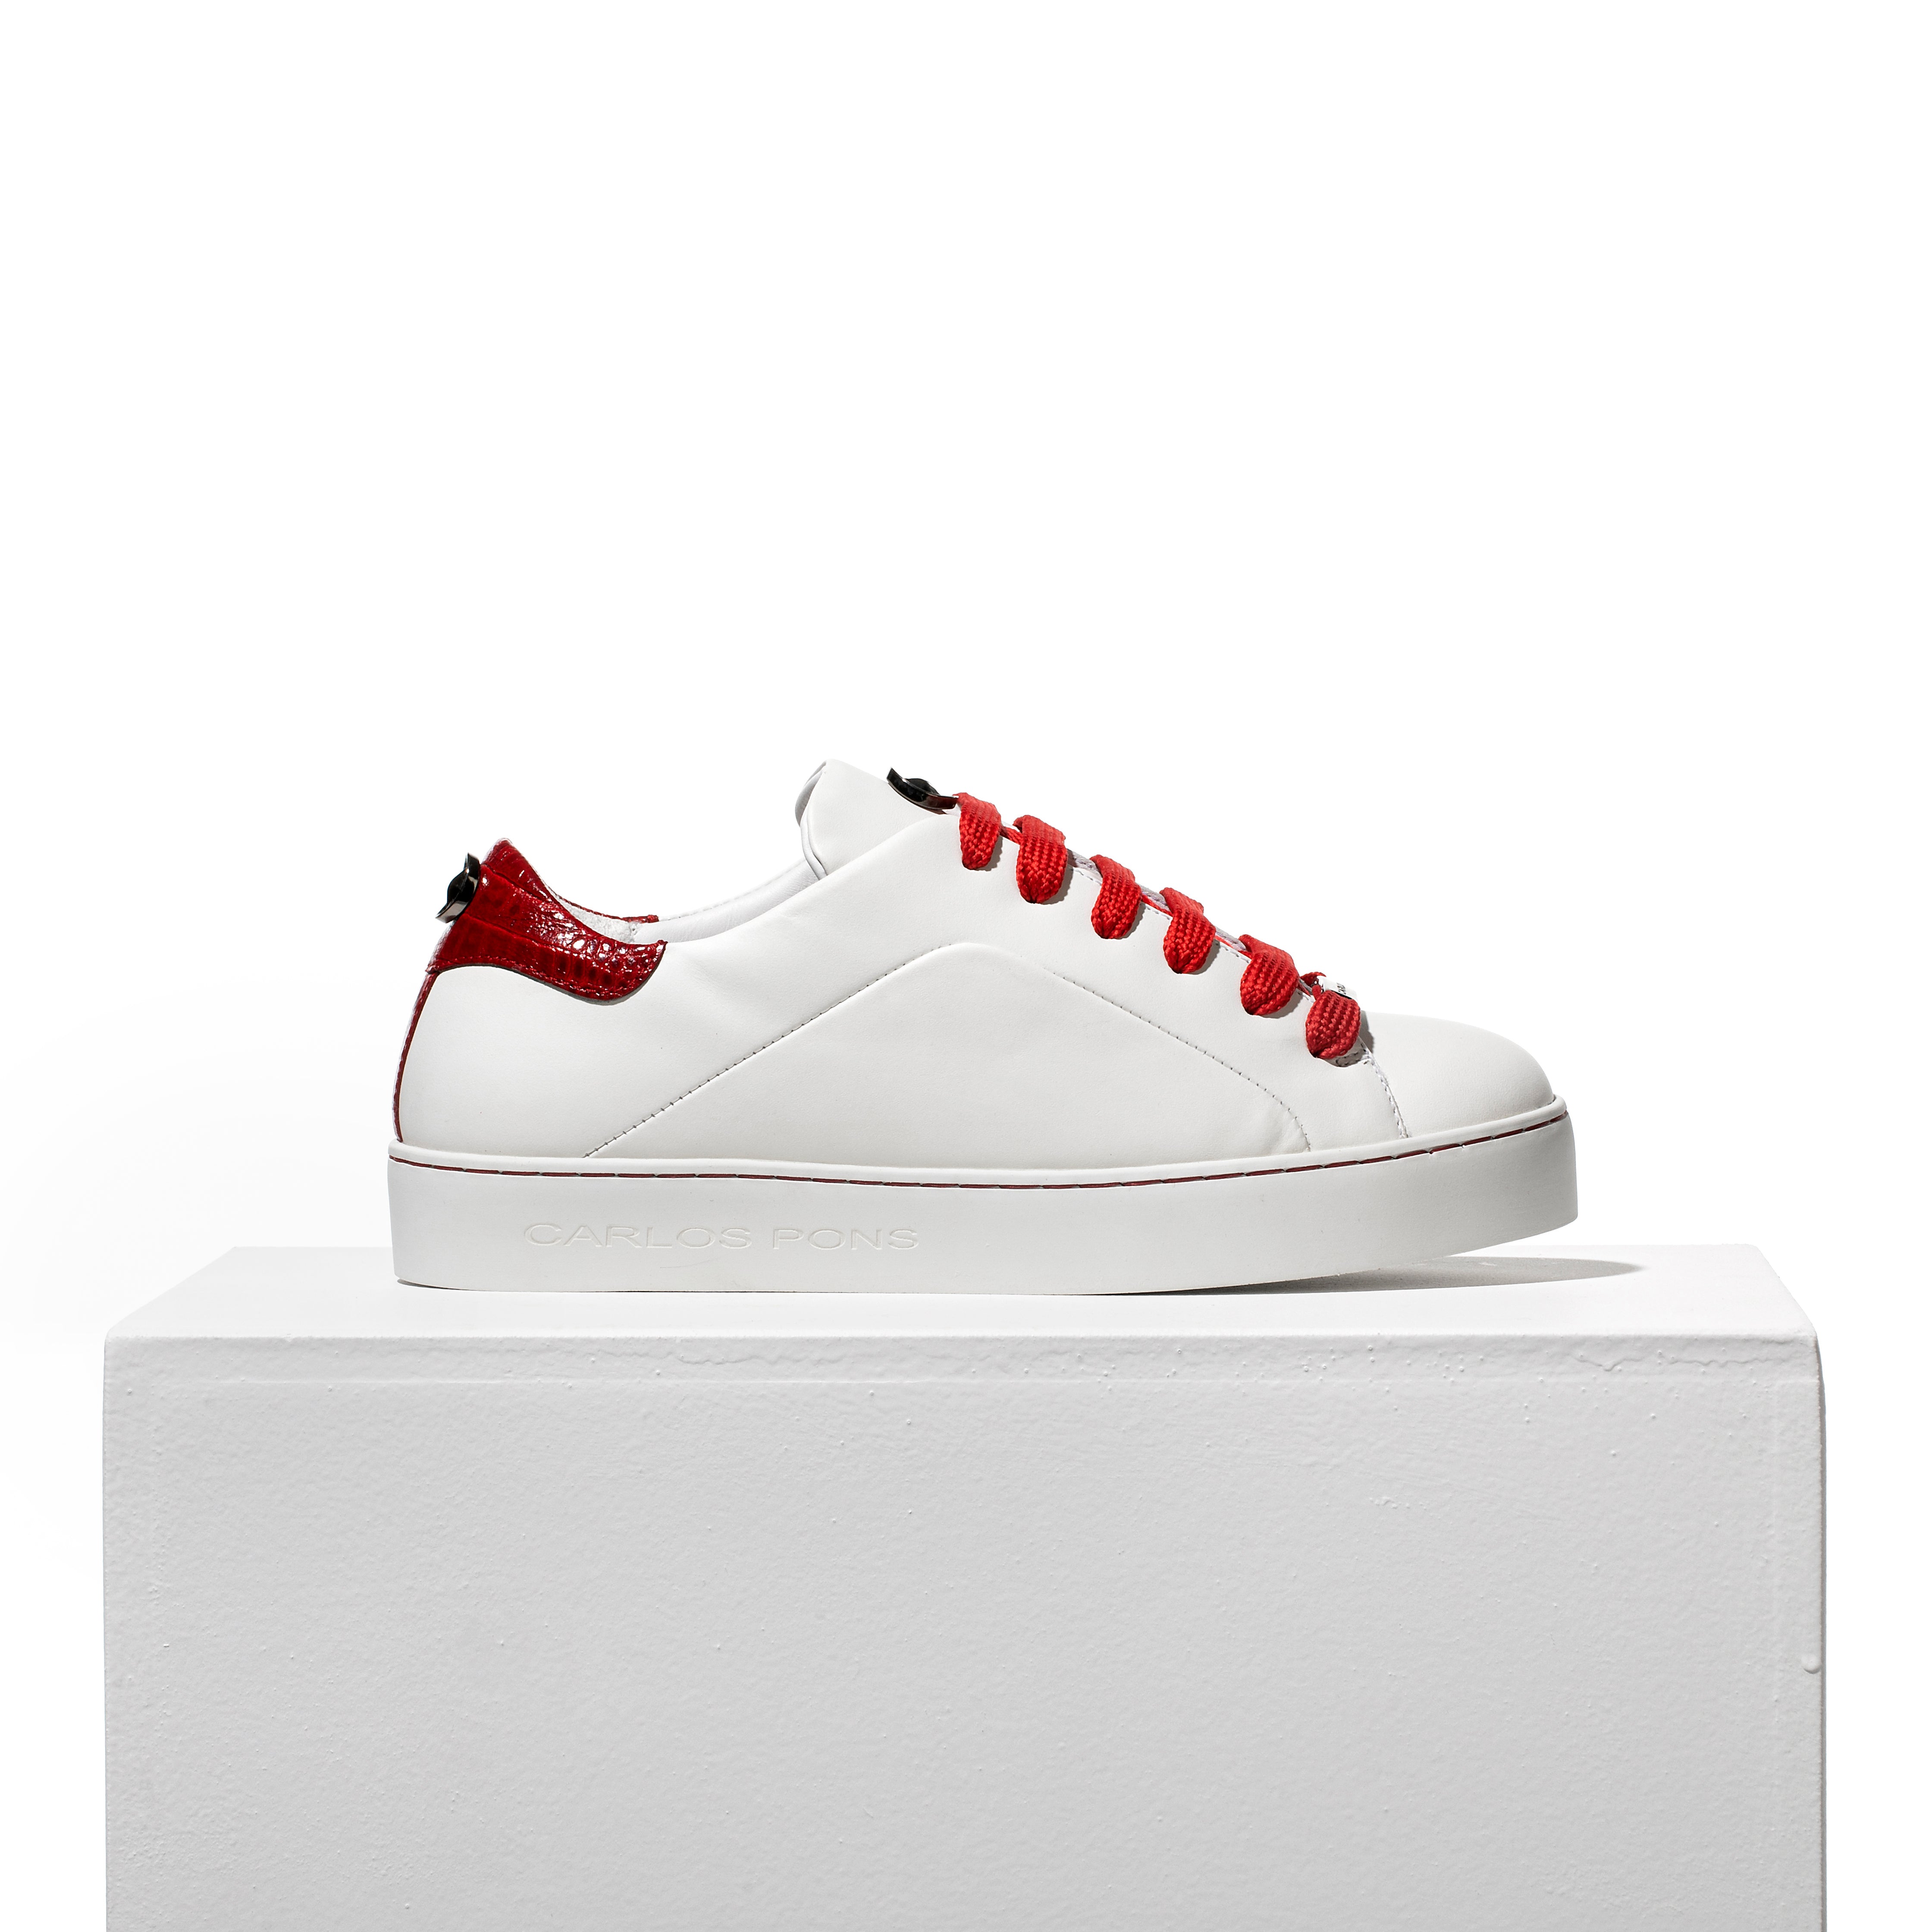 BASIC SNEAKERS WHITE - RED